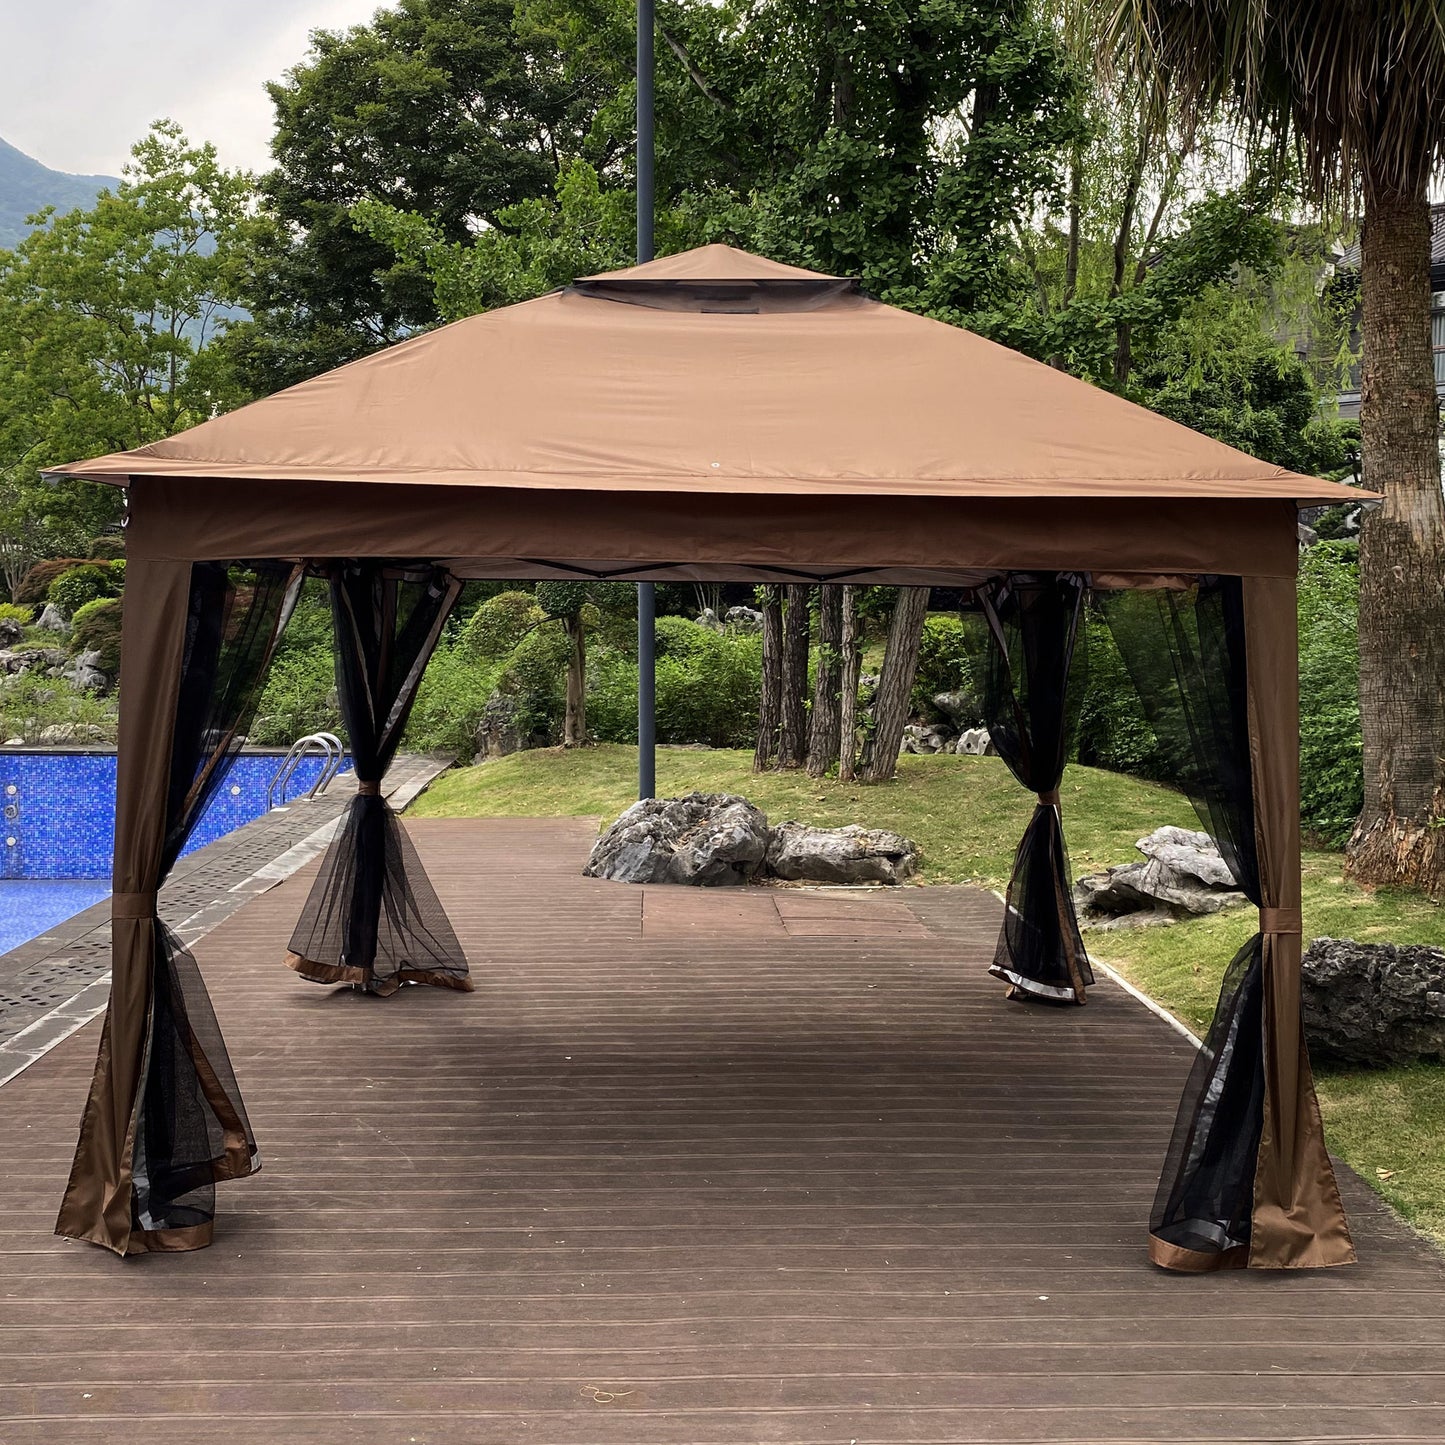 Outdoor 11x 11Ft Pop Up Gazebo Canopy With Removable Zipper Netting,2-Tier Soft Top Event Tent,Suitable For Patio Backyard Garden Camping Area with 4 Sandbags,Brown